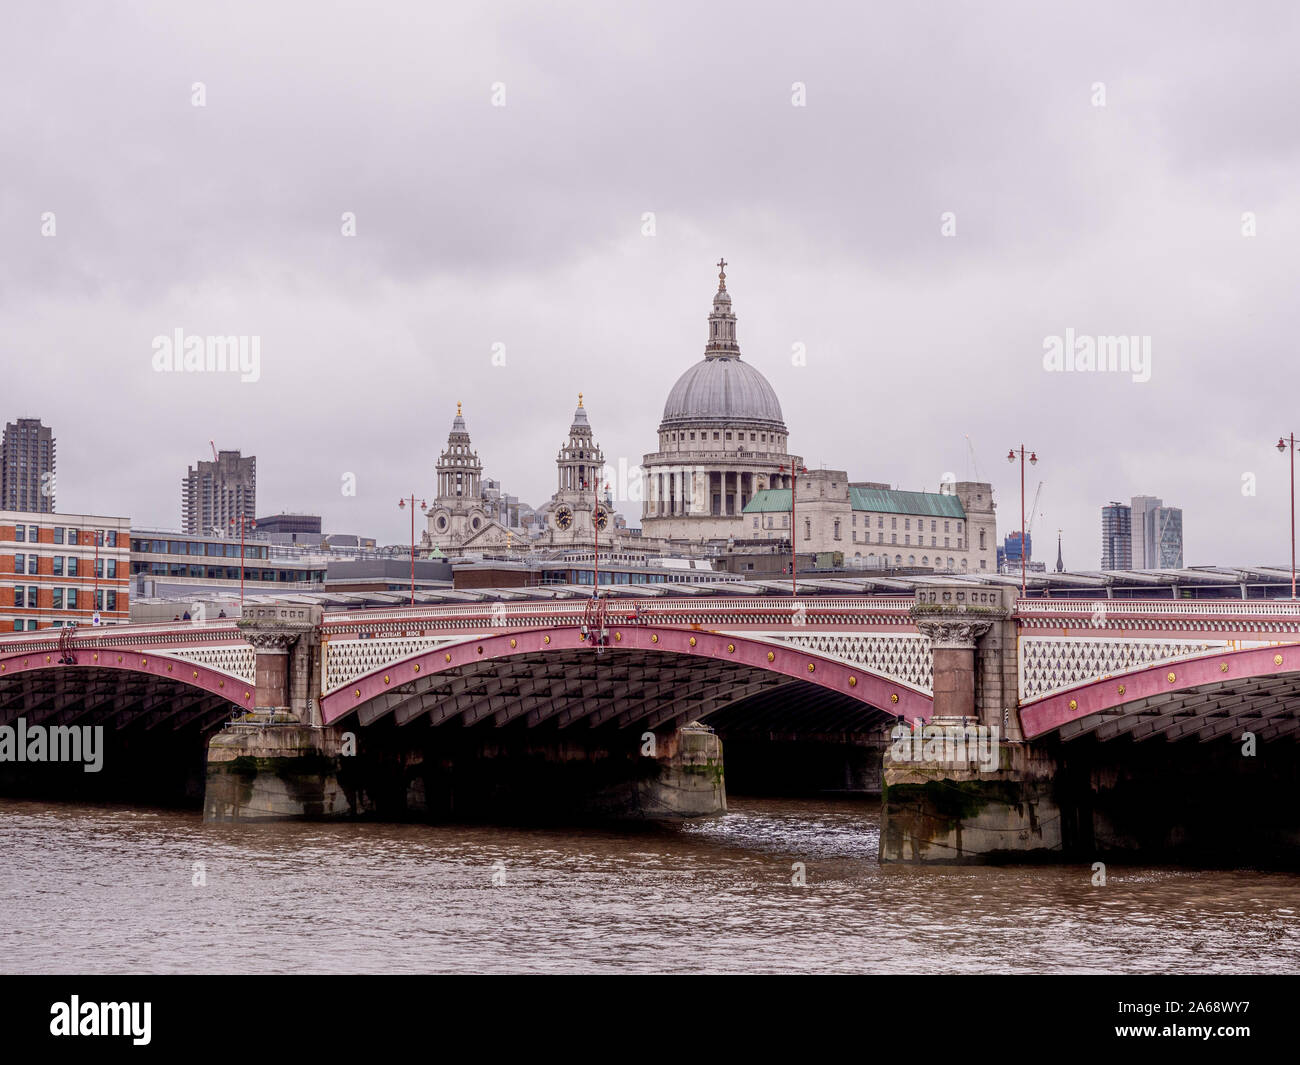 Blackfriars Bridge over the river Thames on a grey misty day with St Pauls, in background. Stock Photo